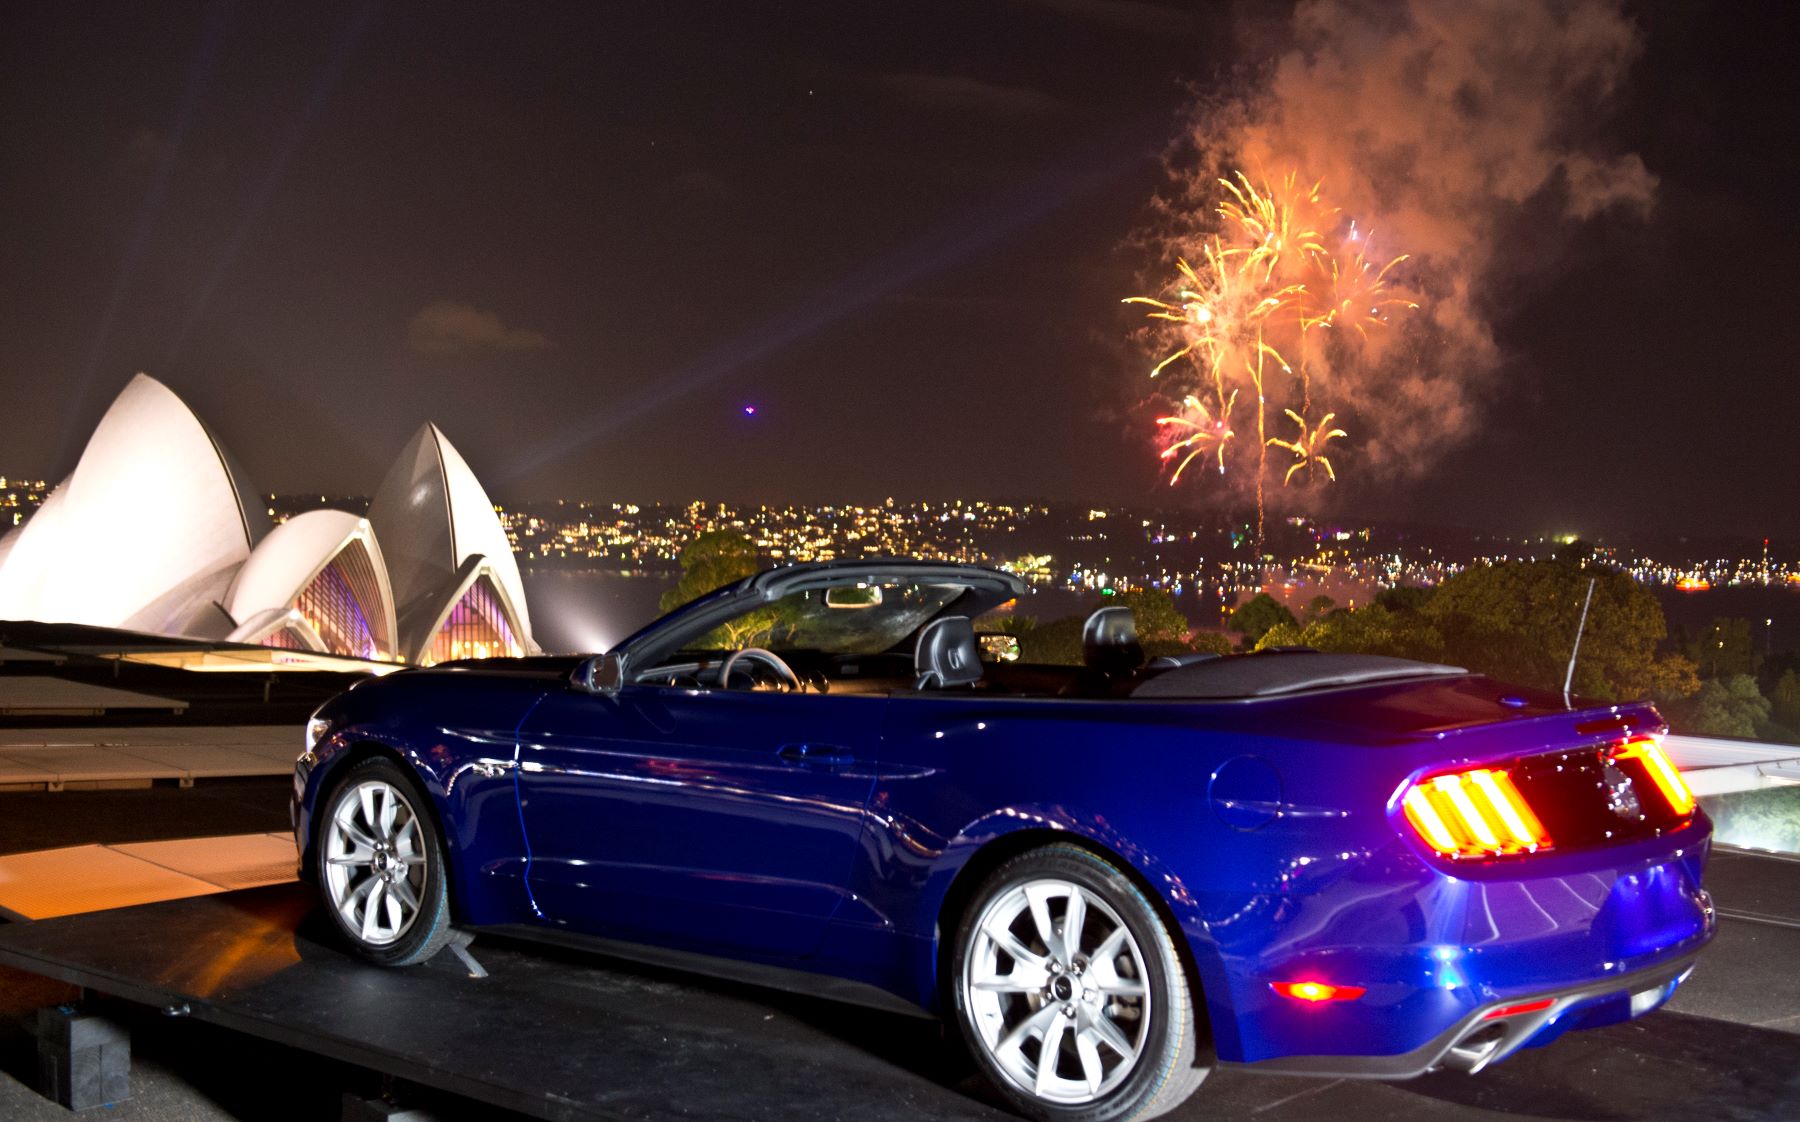 A blue Ford Mustang muscle car parked on New Year's Eve in Sydney, Australia